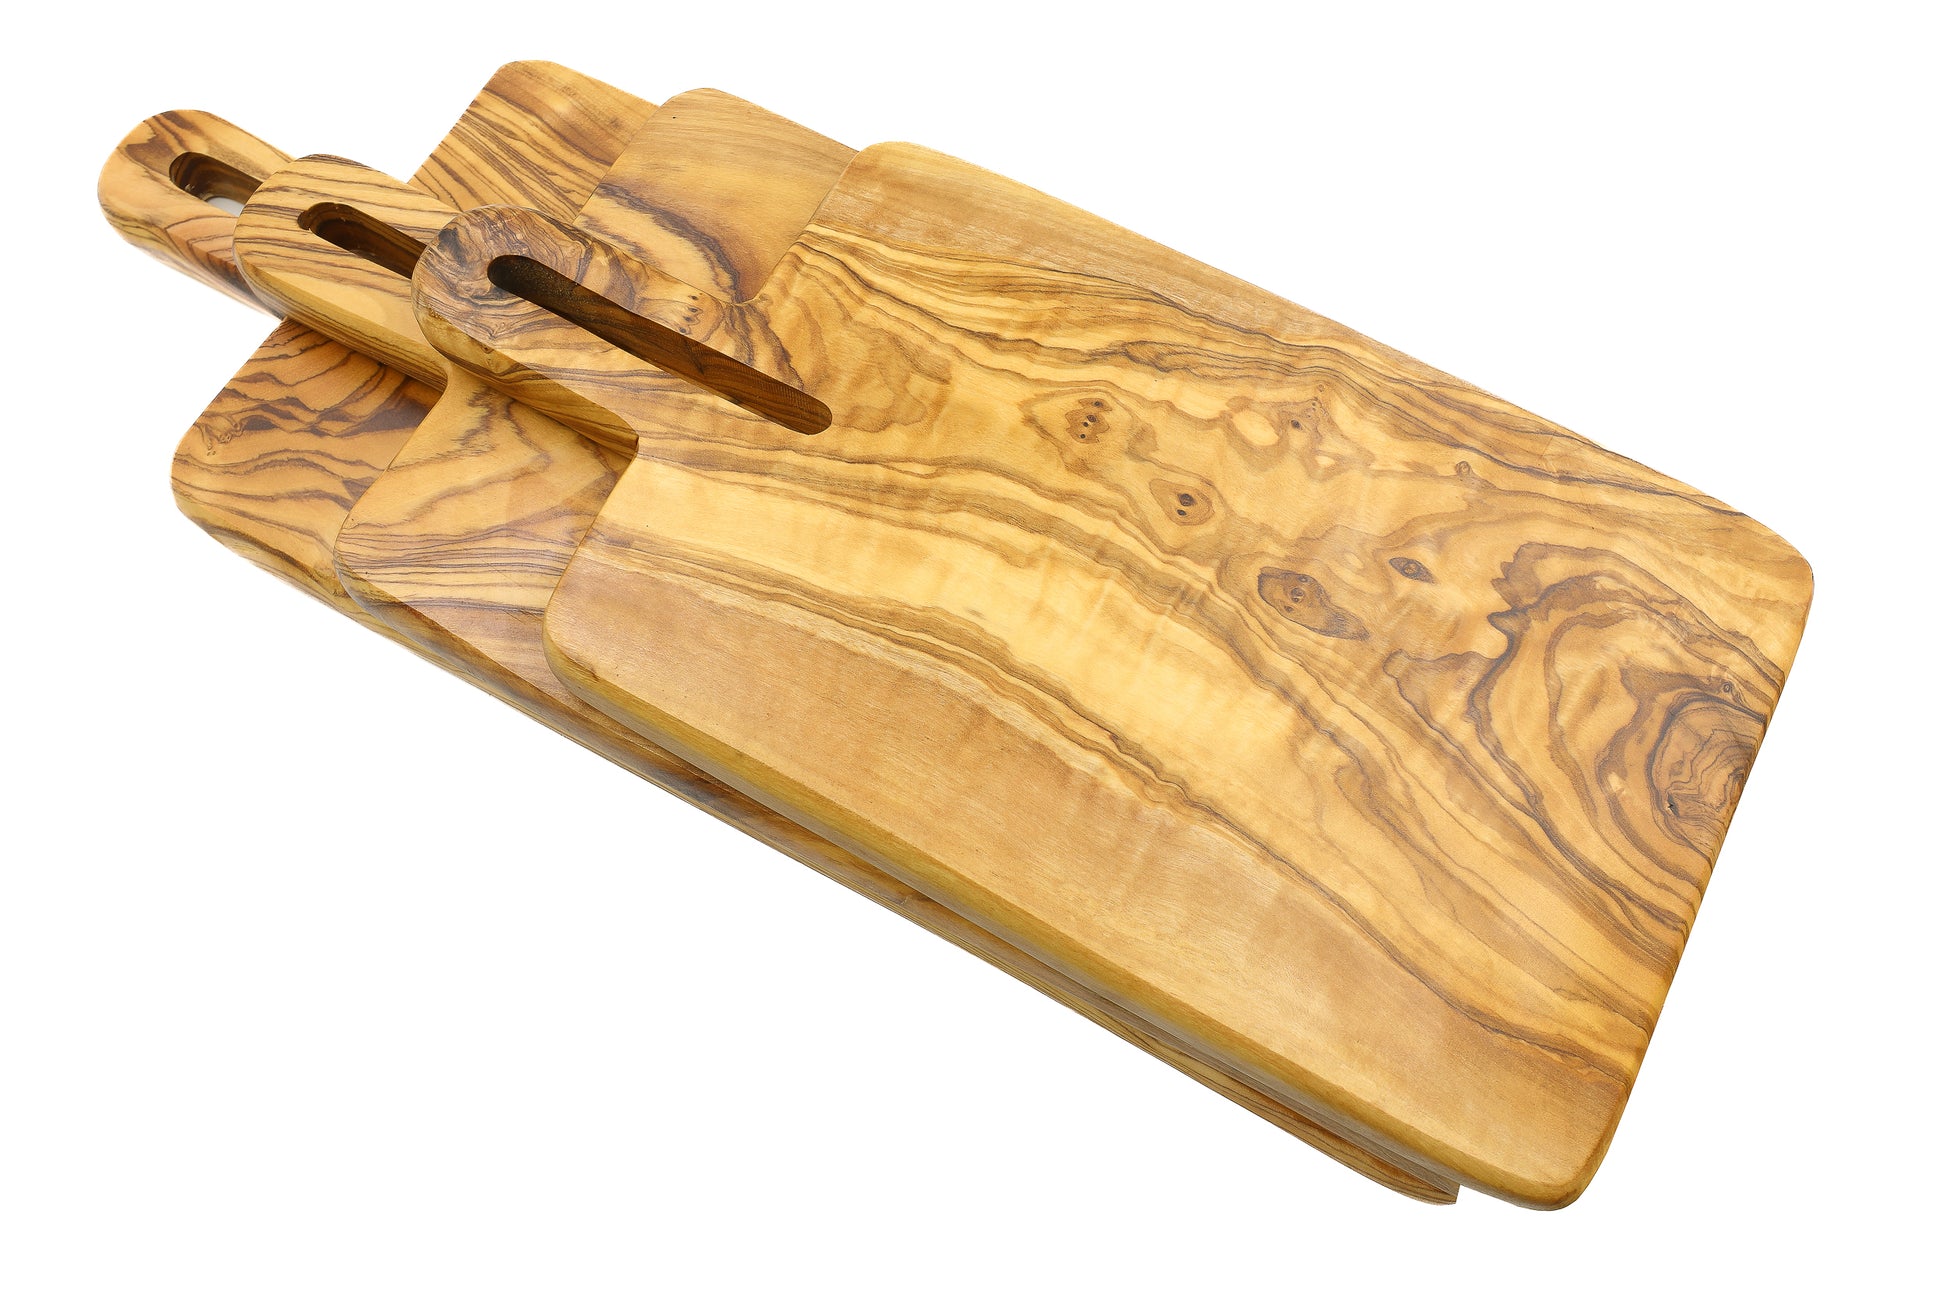 Elegant olive wood board for showcasing your culinary creations